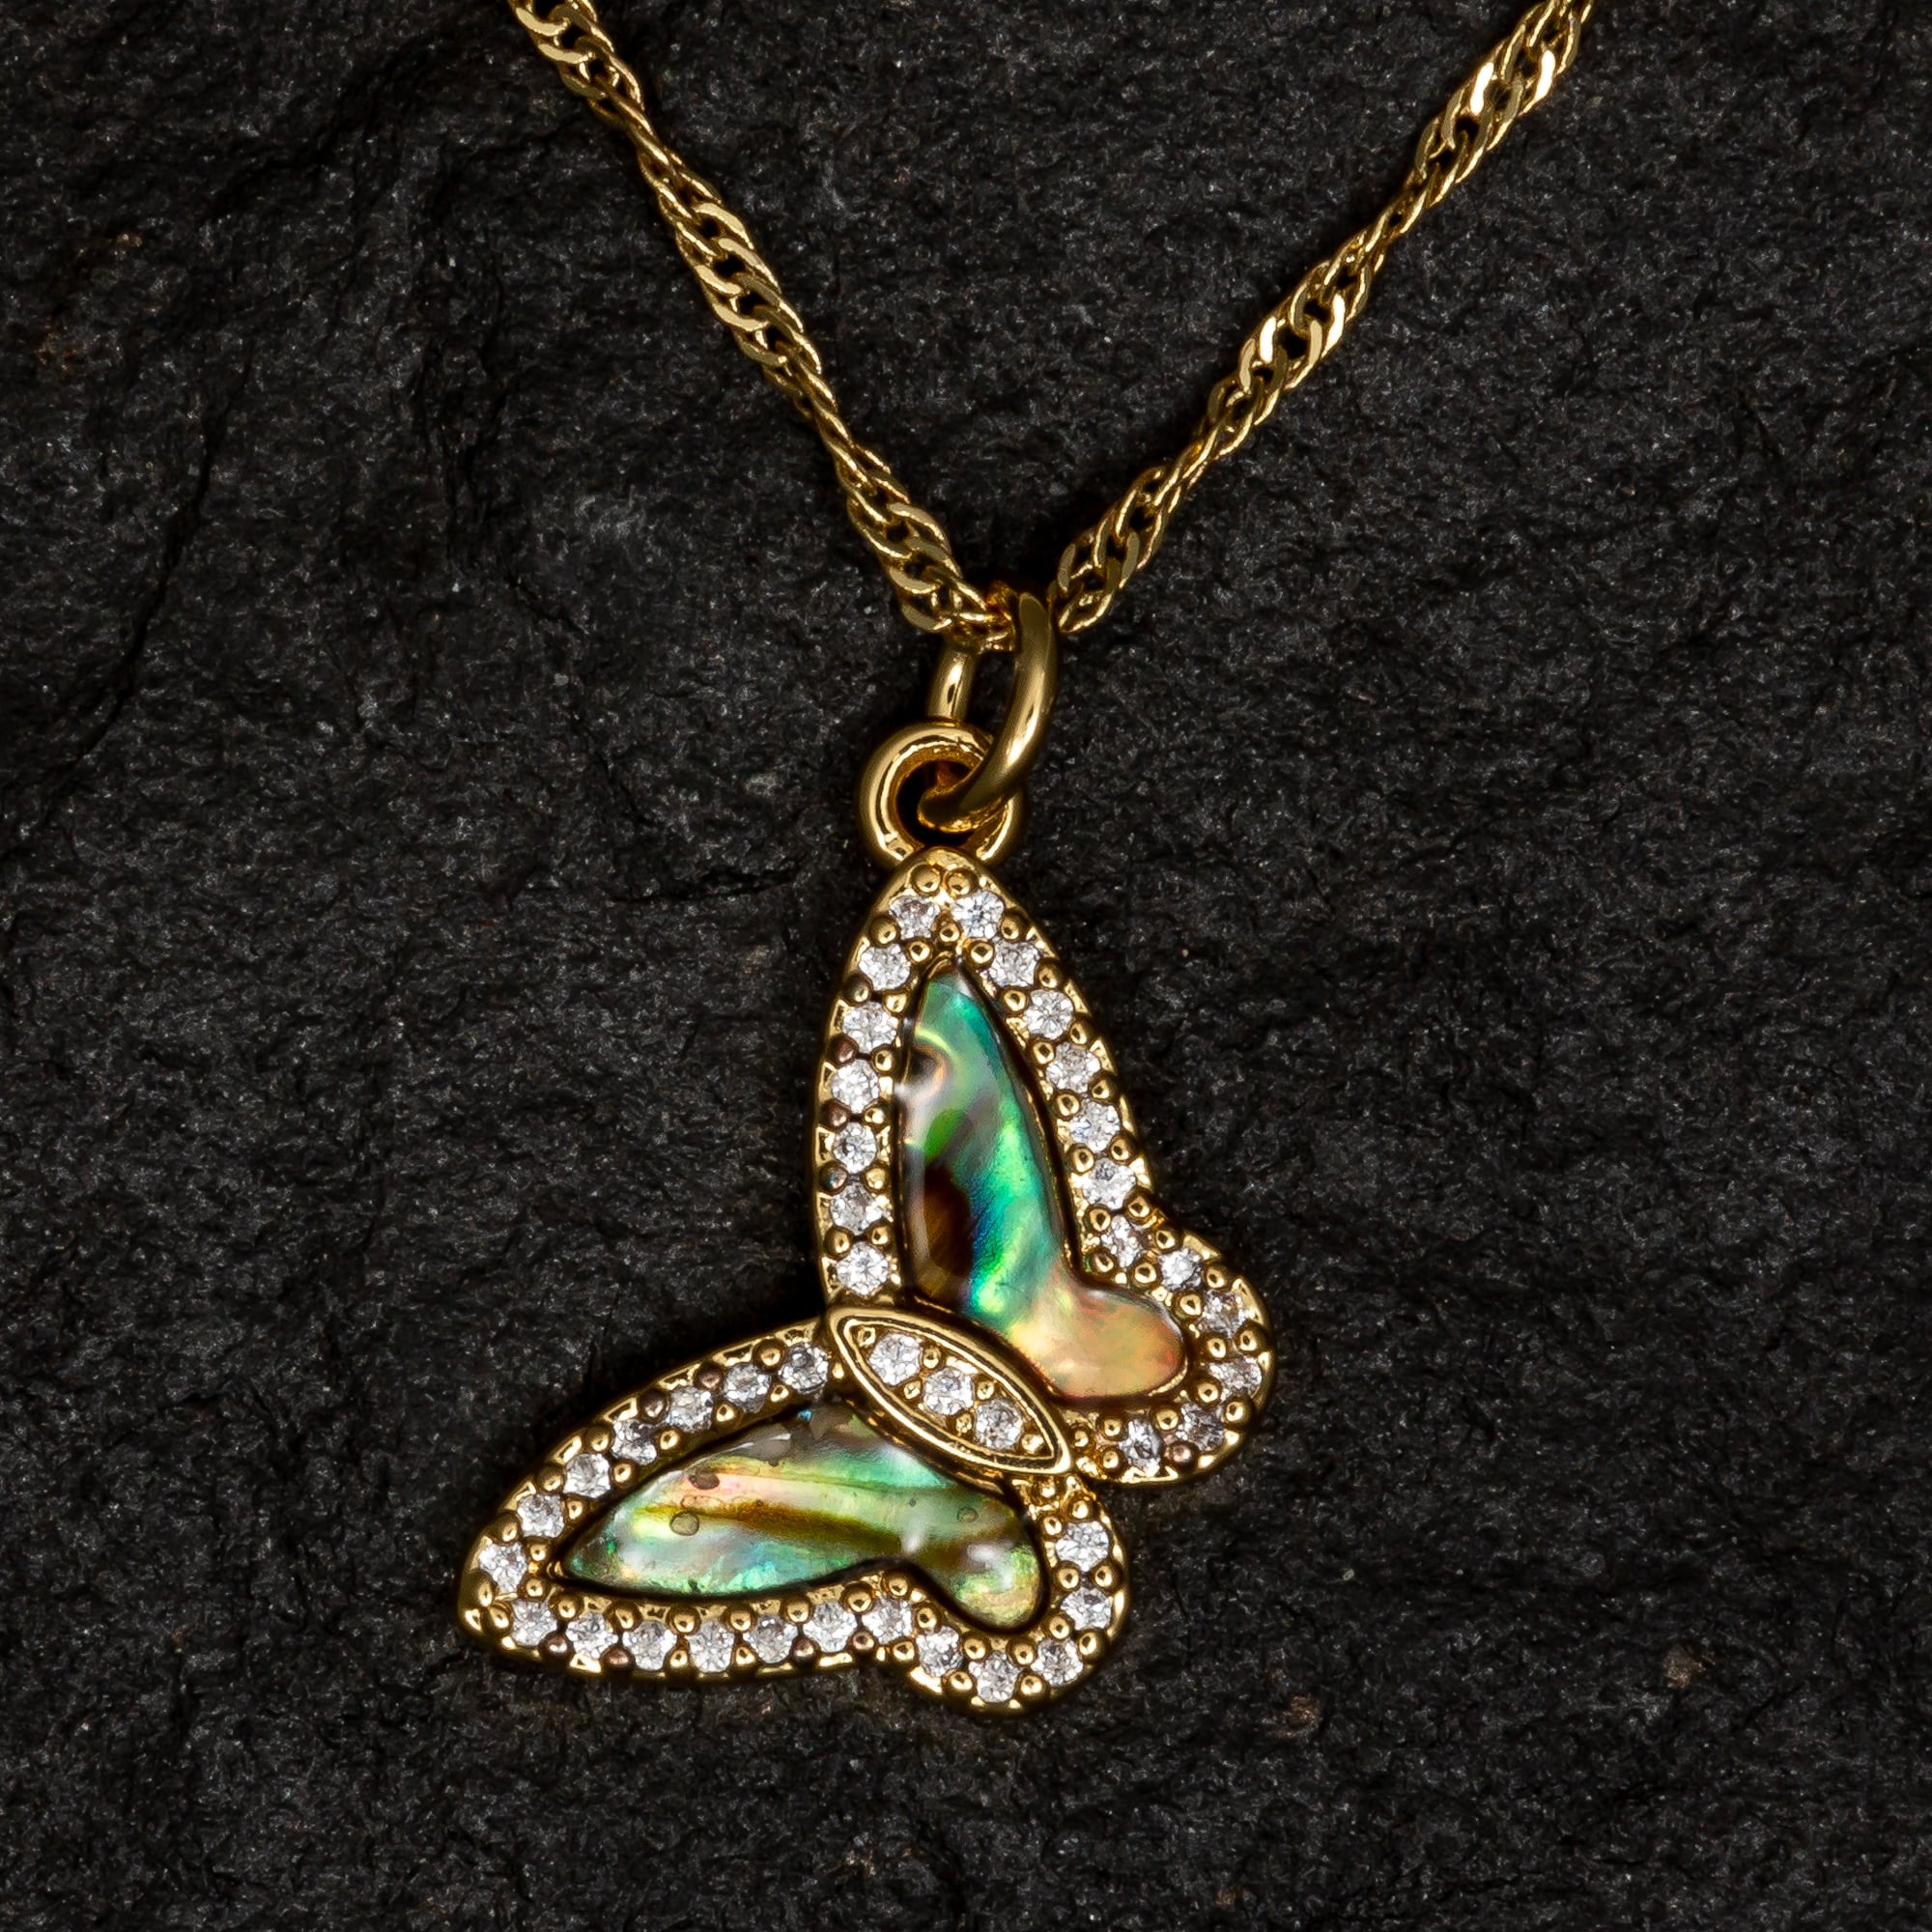 Abalone Shell Butterfly Necklace with Gemstones - Necklaces